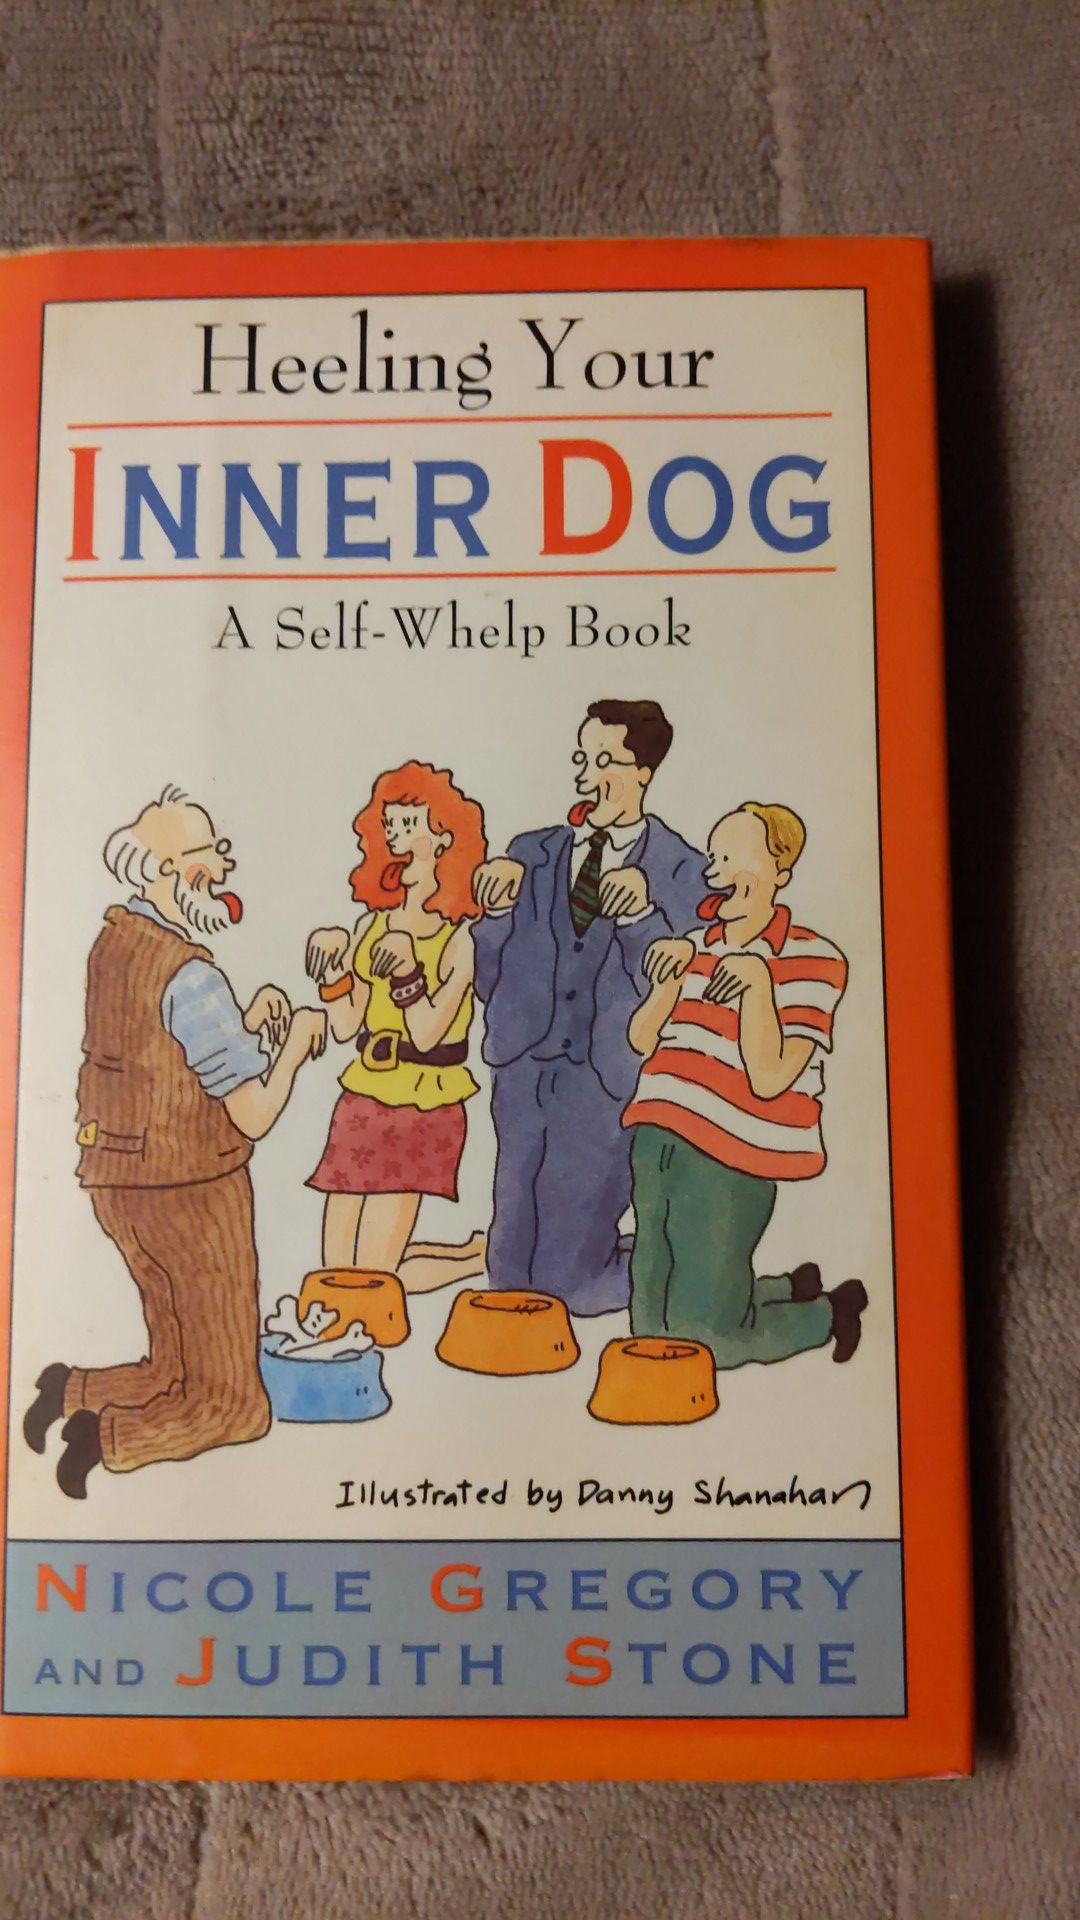 Helling Your Inner Dog by Nicole Gregory